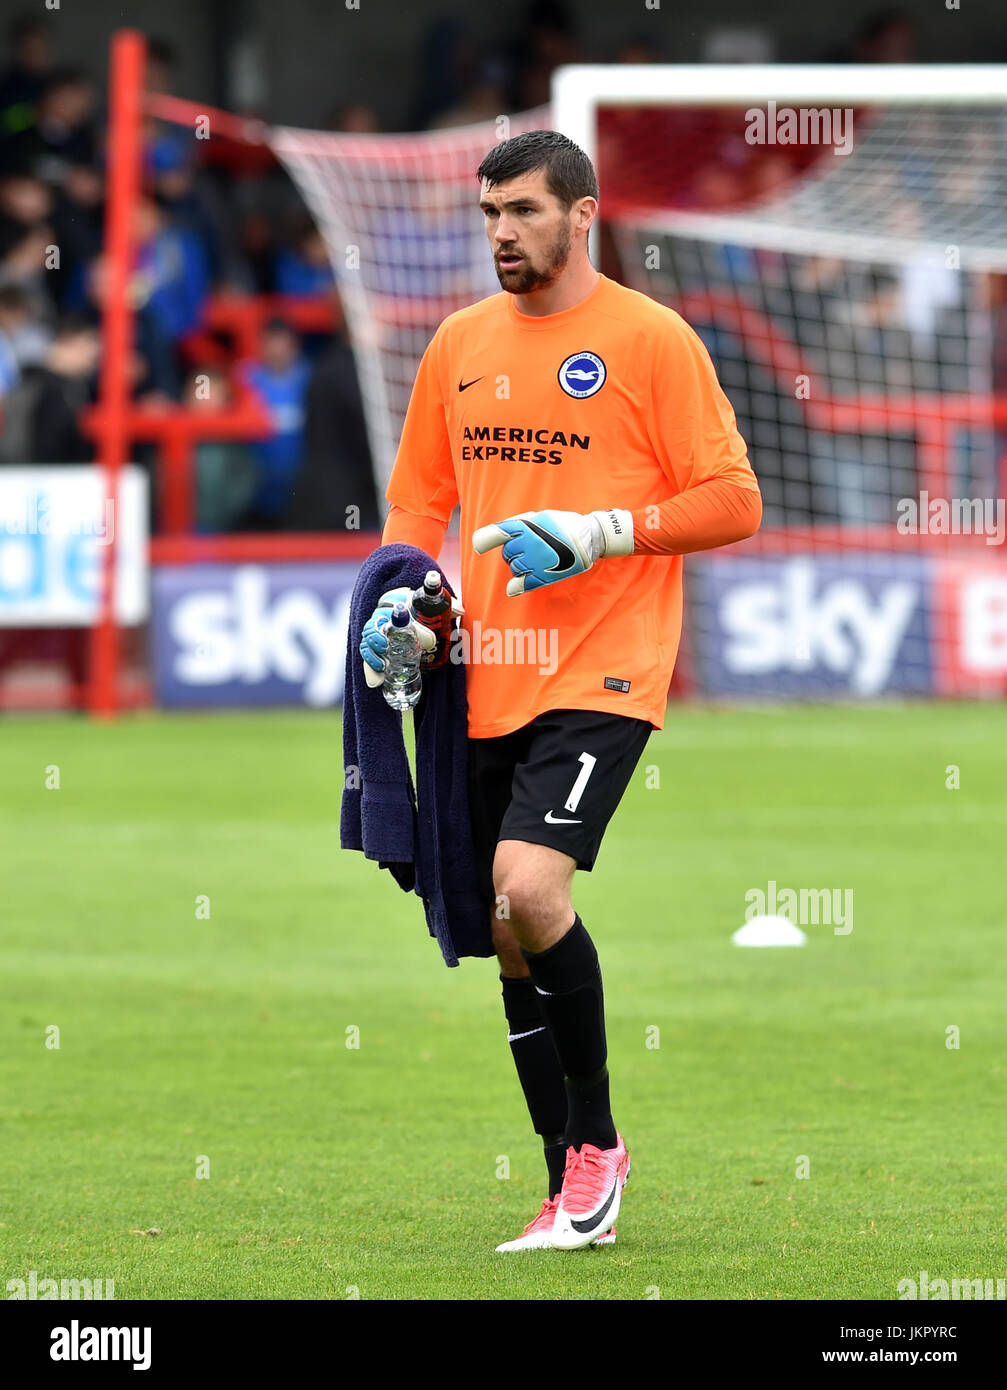 Maty Ryan of Brighton during the Friendly match between Crawley Town and Brighton and Hove Albion at the Checkatrade Stadium in Crawley. 22 Jul 2017 - Editorial use only. No merchandising. For Football images FA and Premier League restrictions apply inc. no internet/mobile usage without FAPL license - for details contact Football Dataco Stock Photo